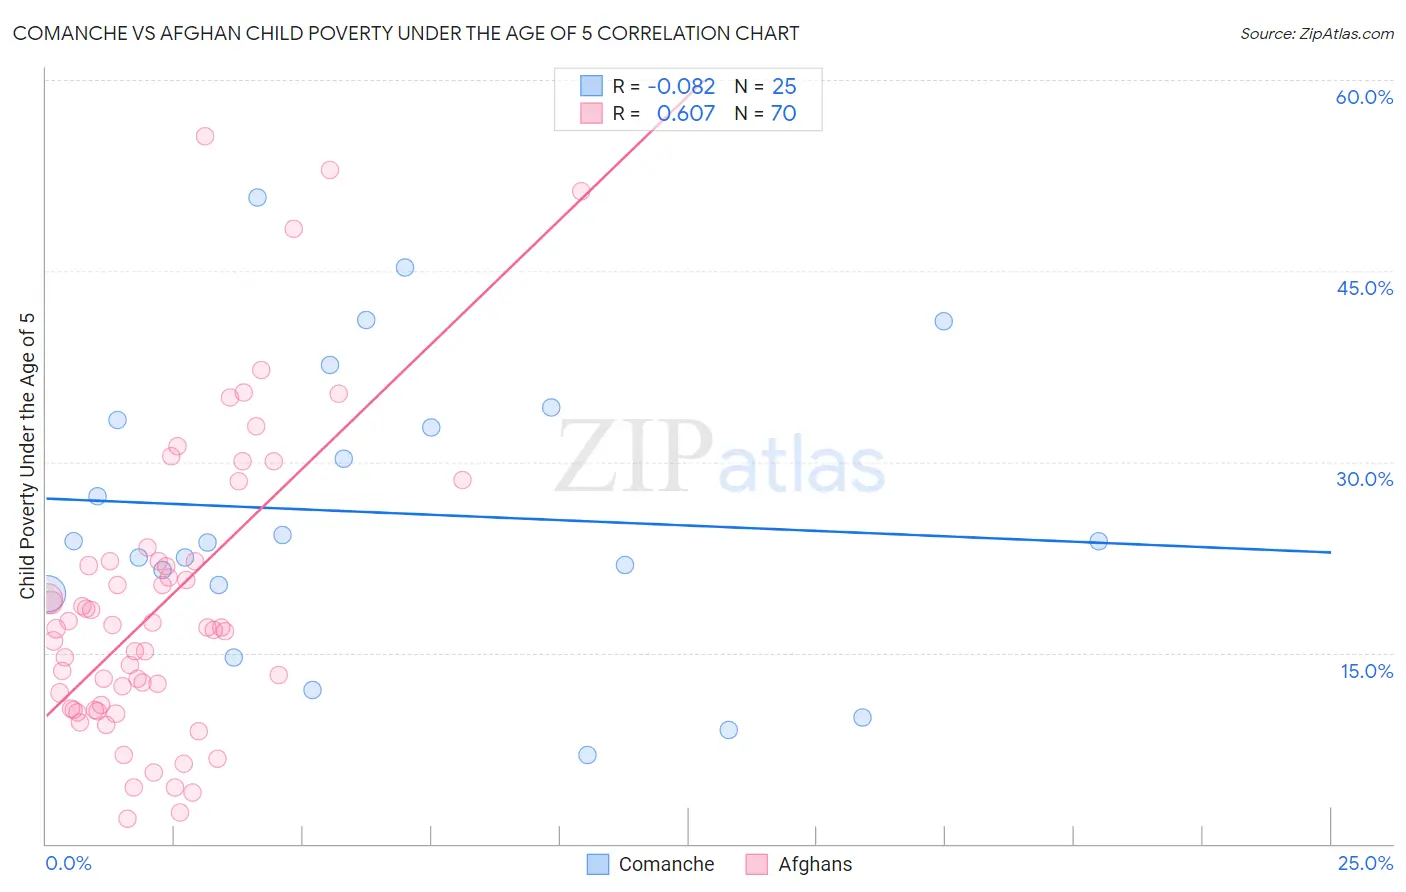 Comanche vs Afghan Child Poverty Under the Age of 5